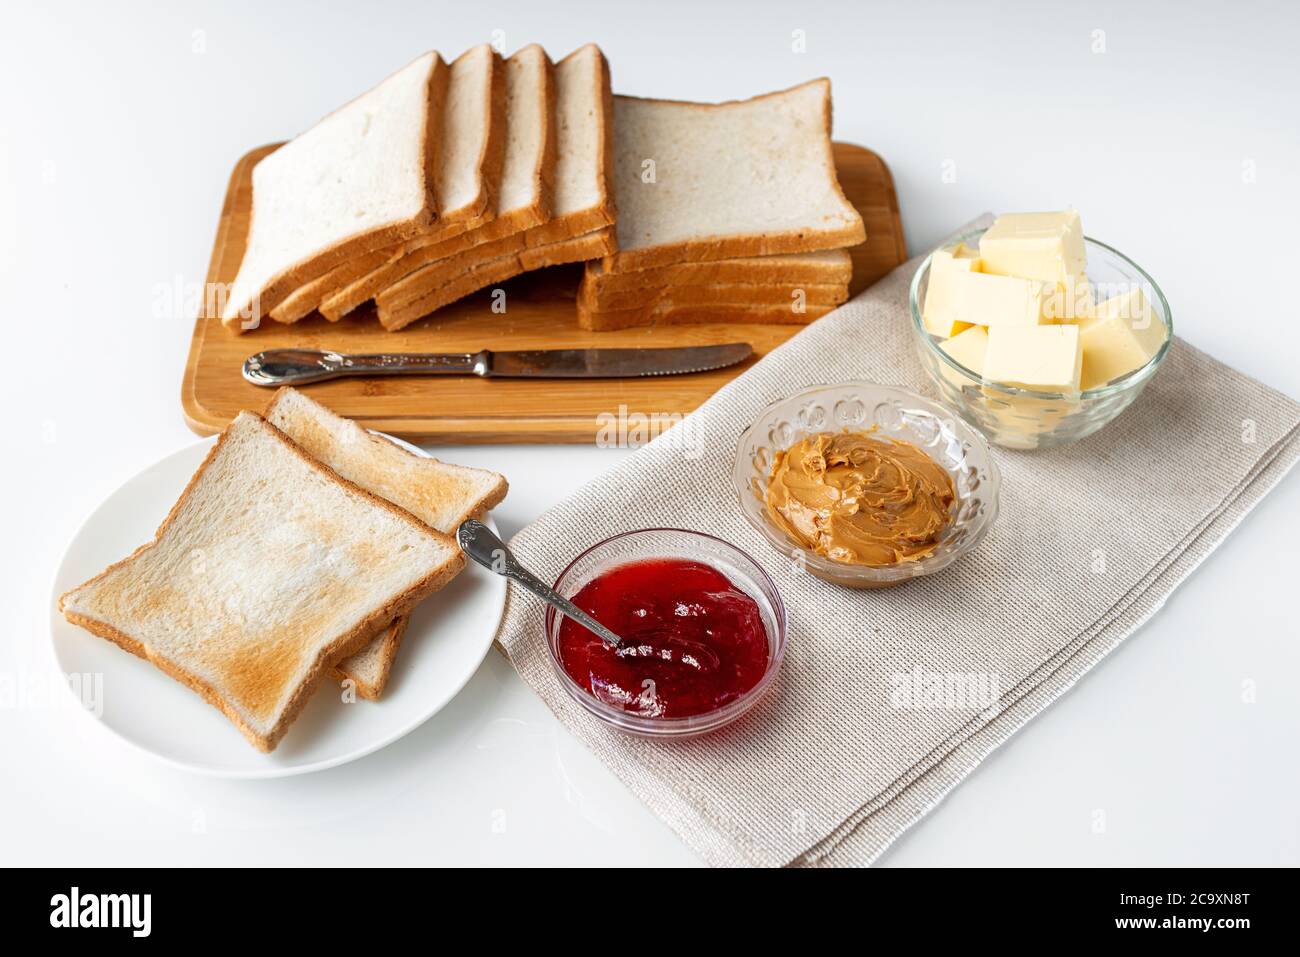 Ingredients For A Delicious Breakfast Toasted Bread Butter Peanut Butter And Homemade Raspberry Jam On A Table Stock Photo Alamy